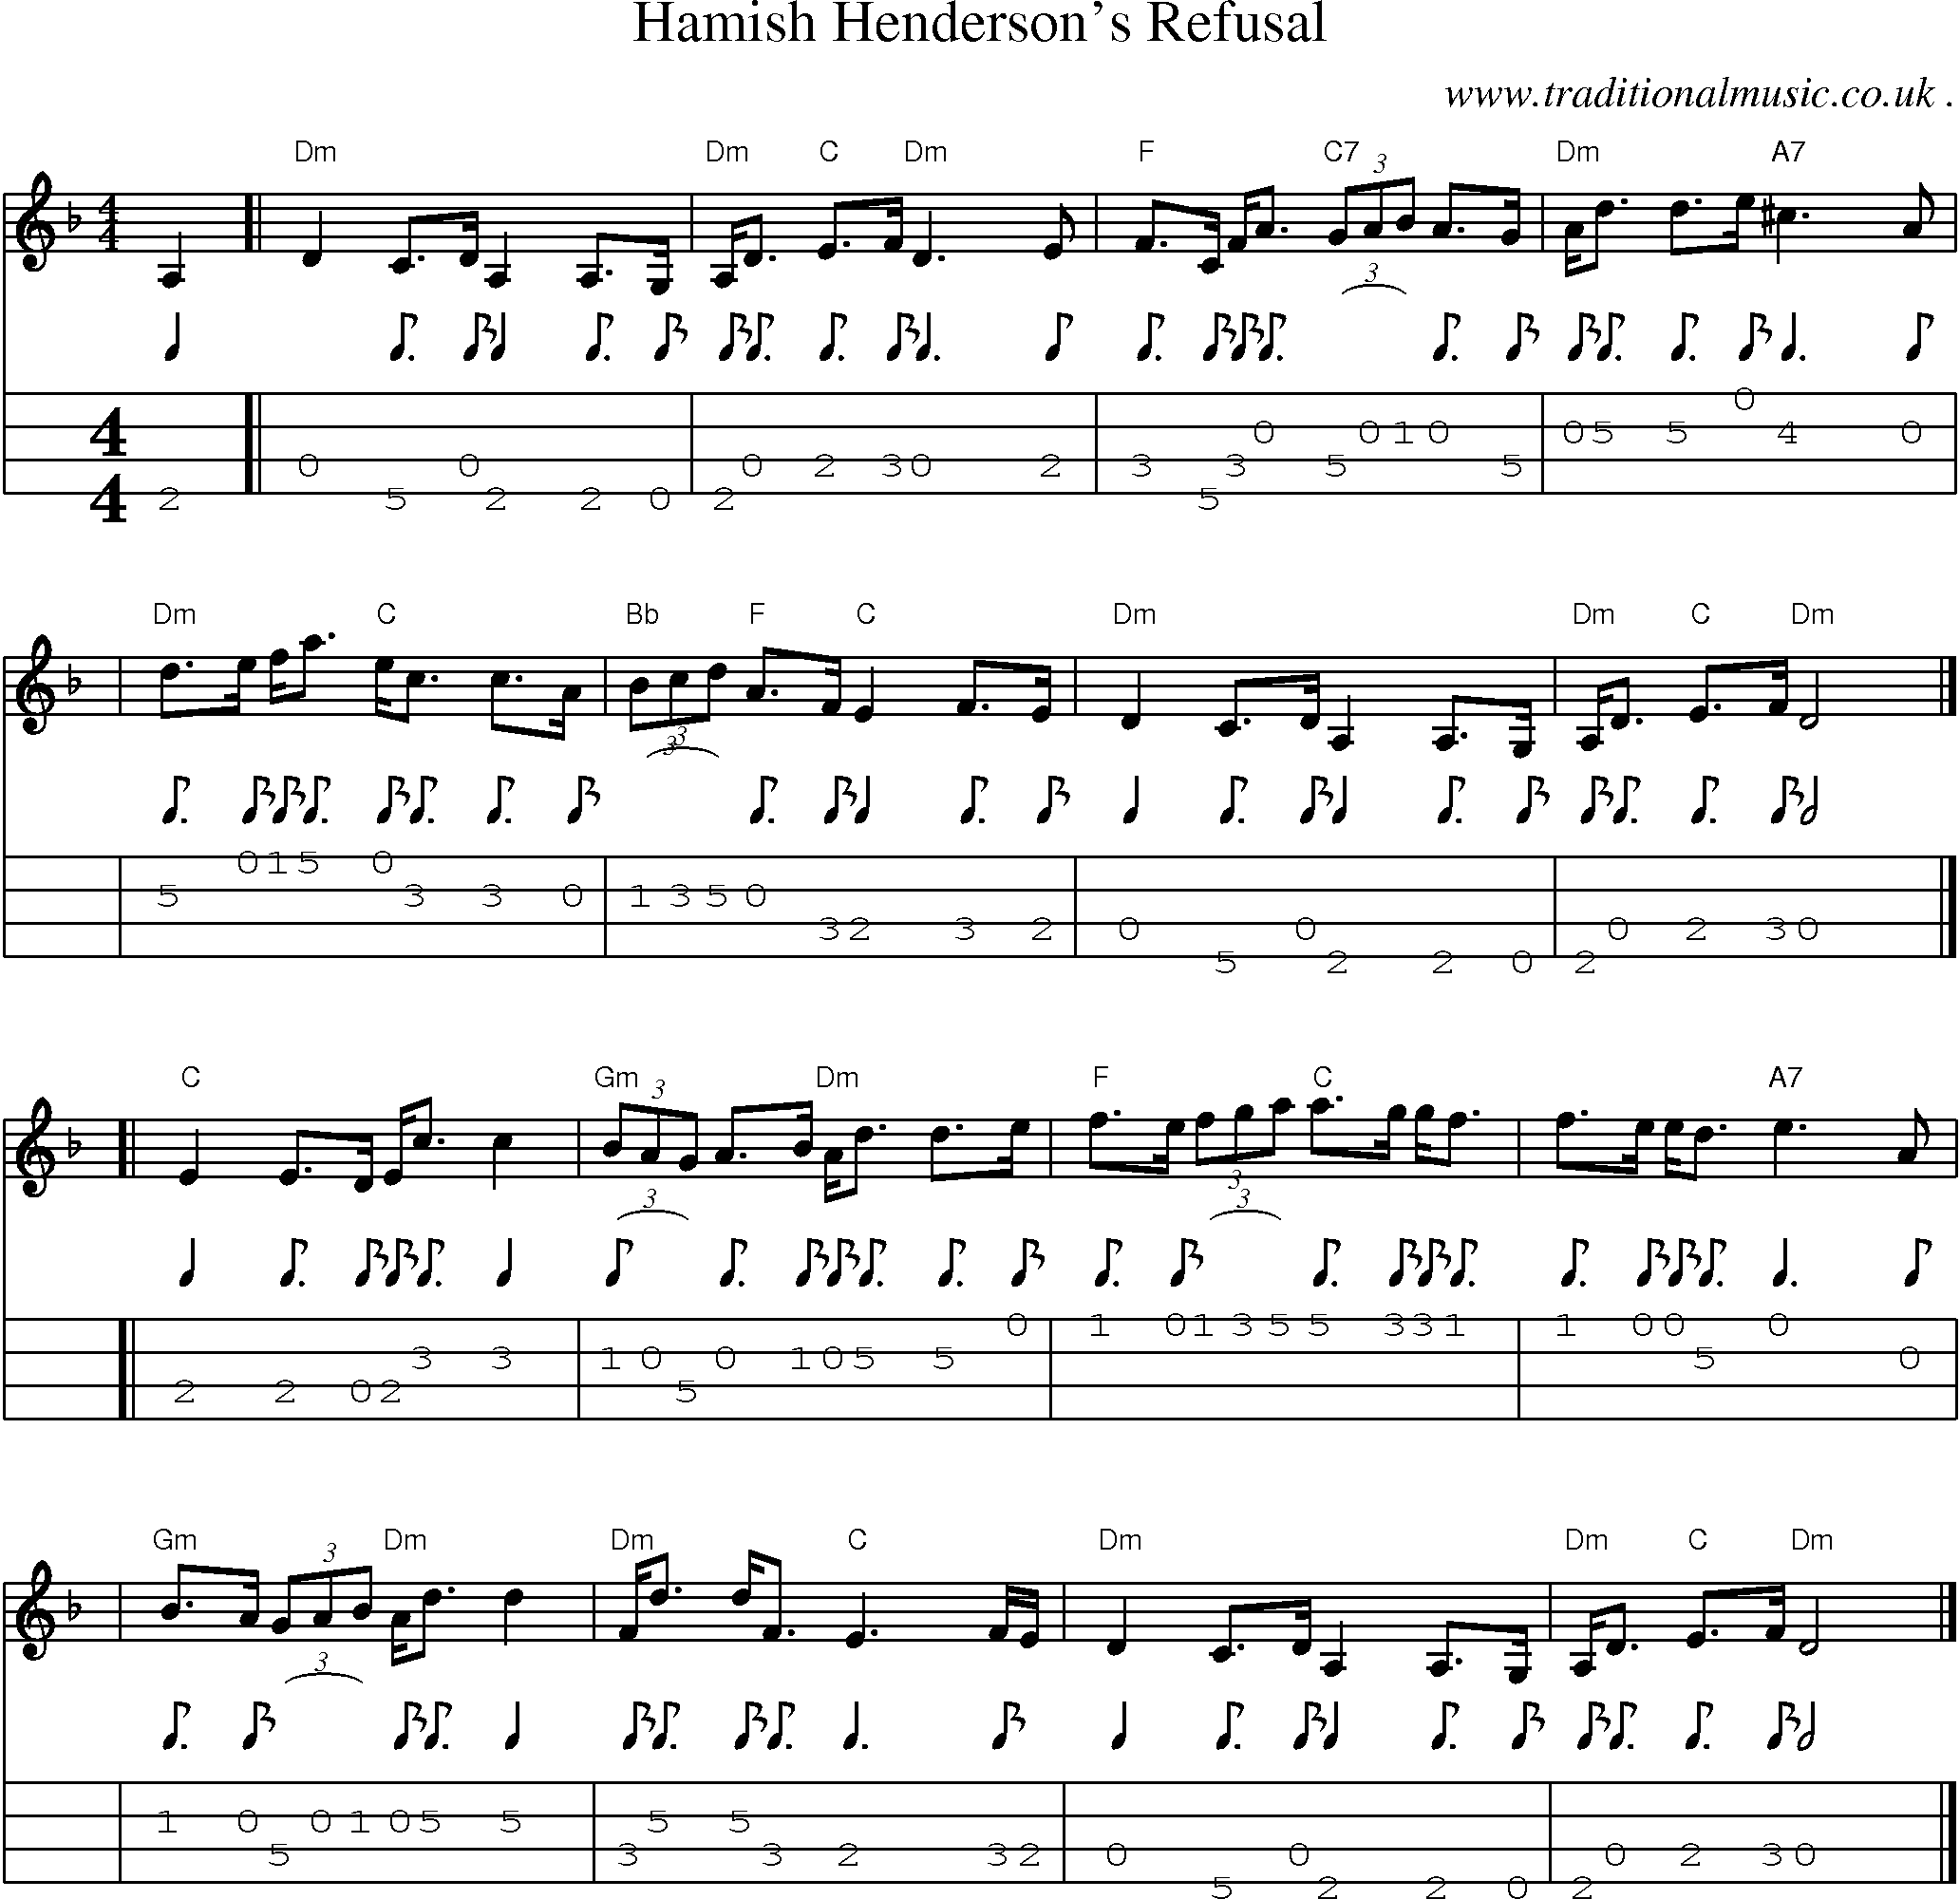 Sheet-music  score, Chords and Mandolin Tabs for Hamish Hendersons Refusal